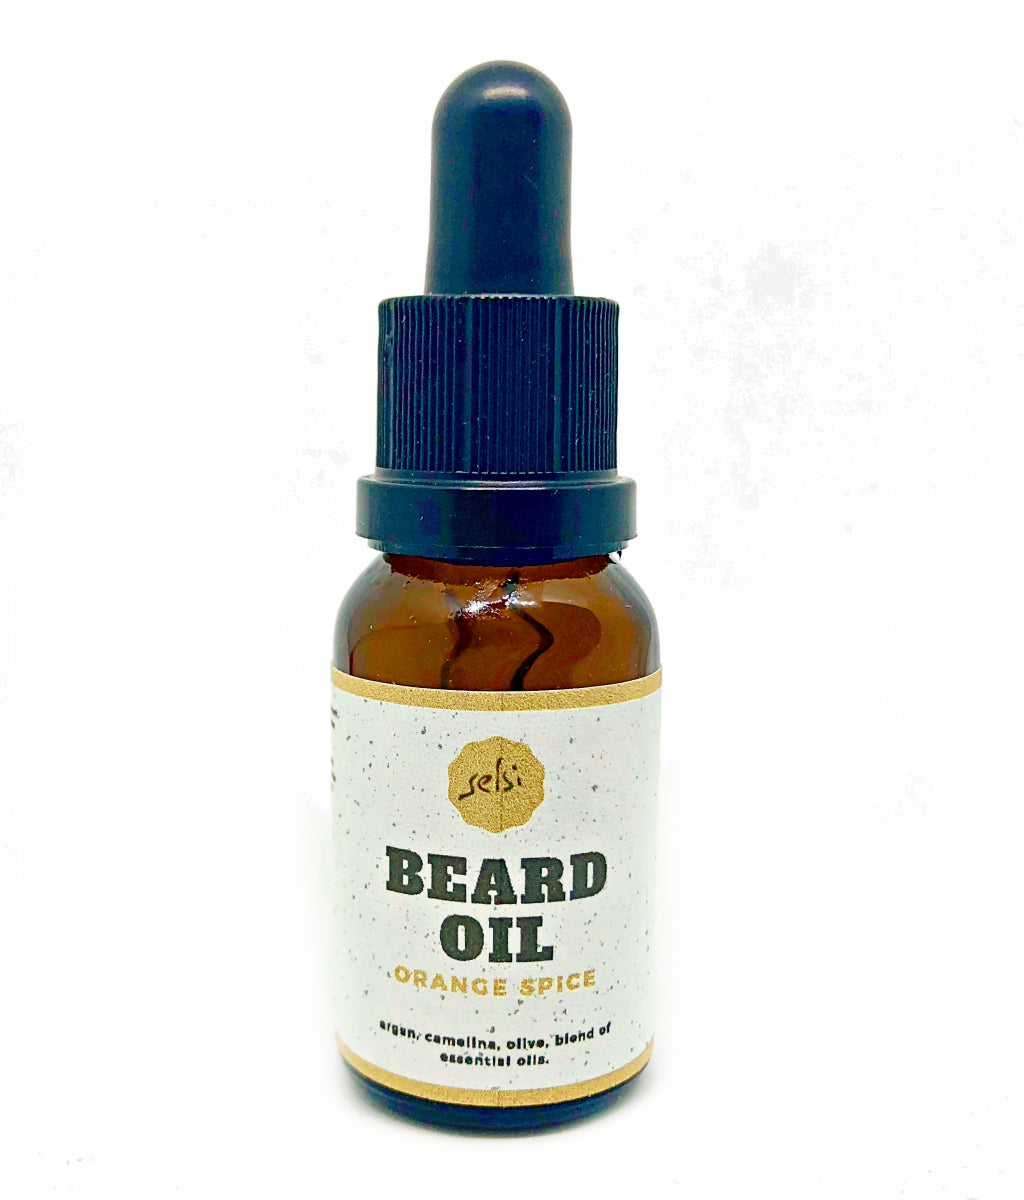 Hand made natural beard oil, lightly scented with orange and spice essential oils. Made by Selsi in Toronto.